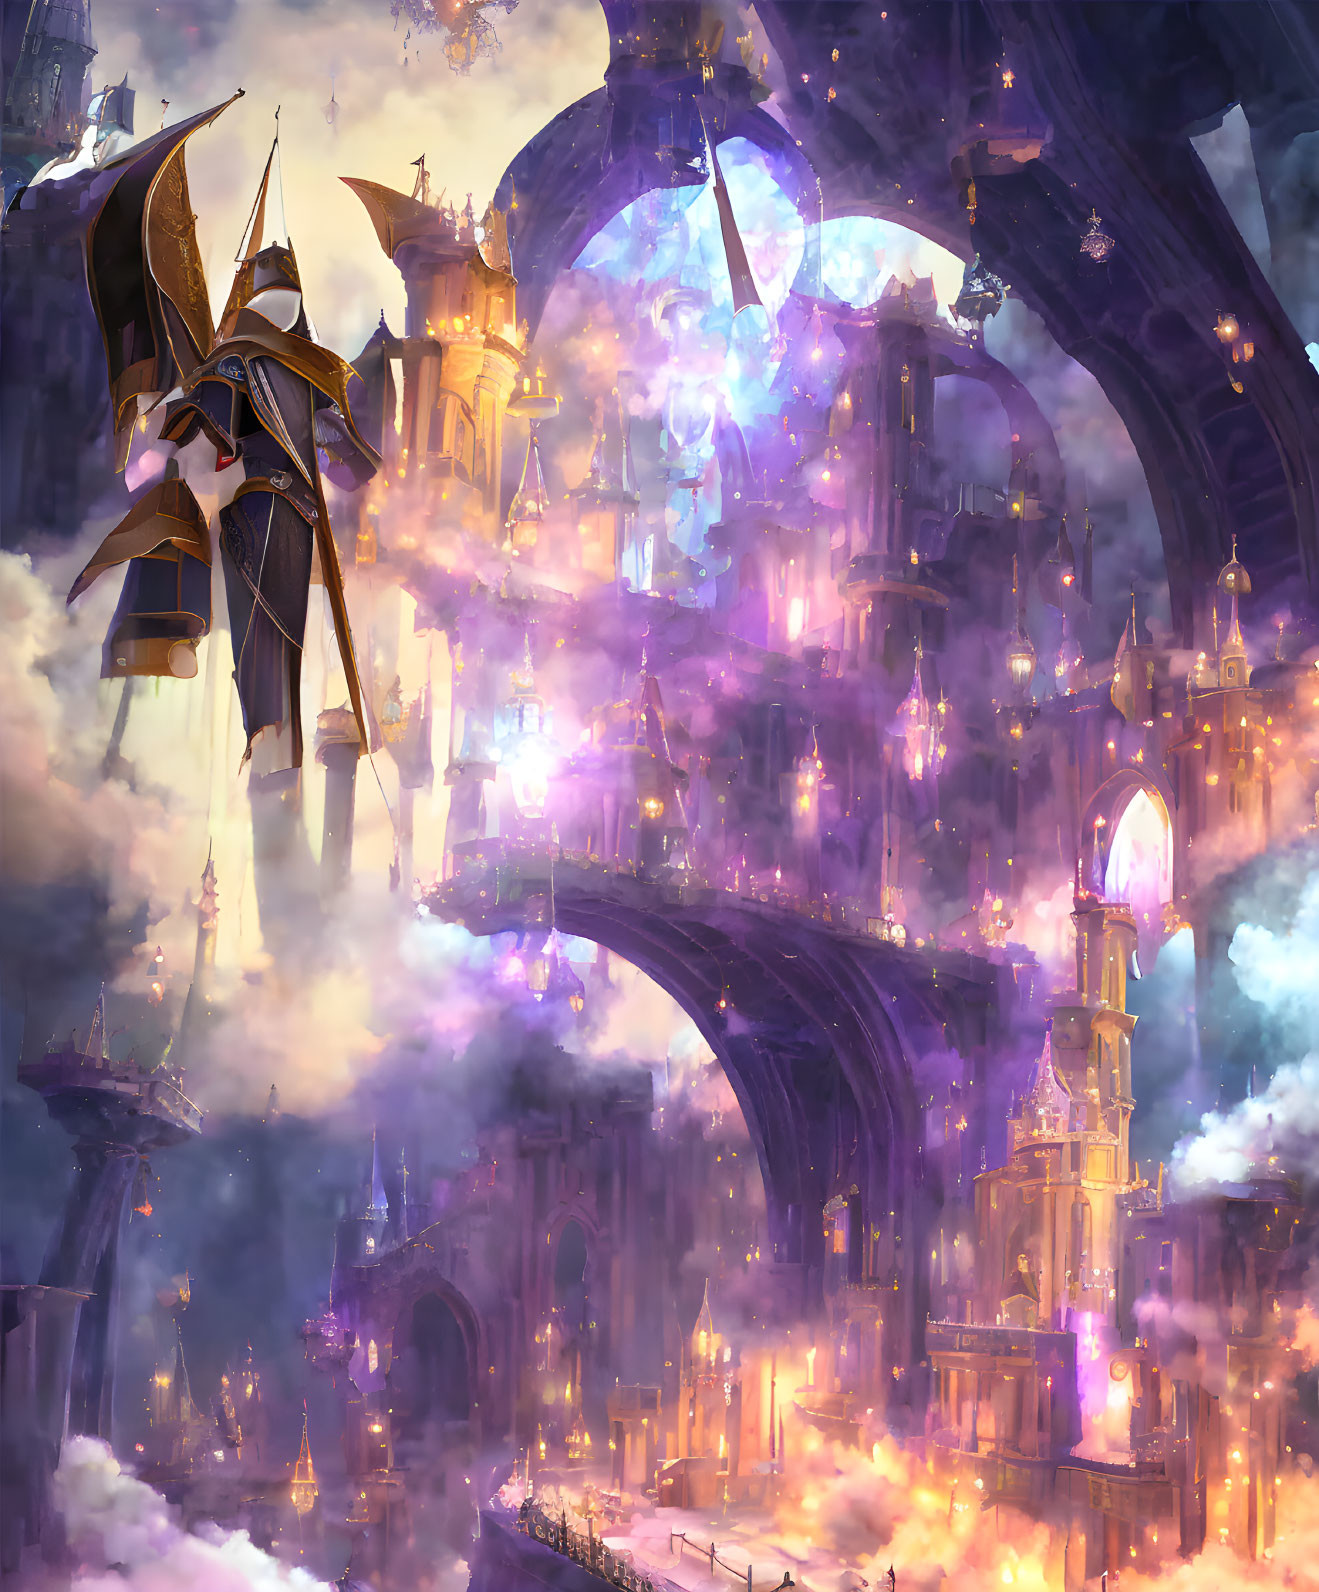 Fantastical cityscape with glowing purple hues and illuminated spires featuring a sailing ship in the sky